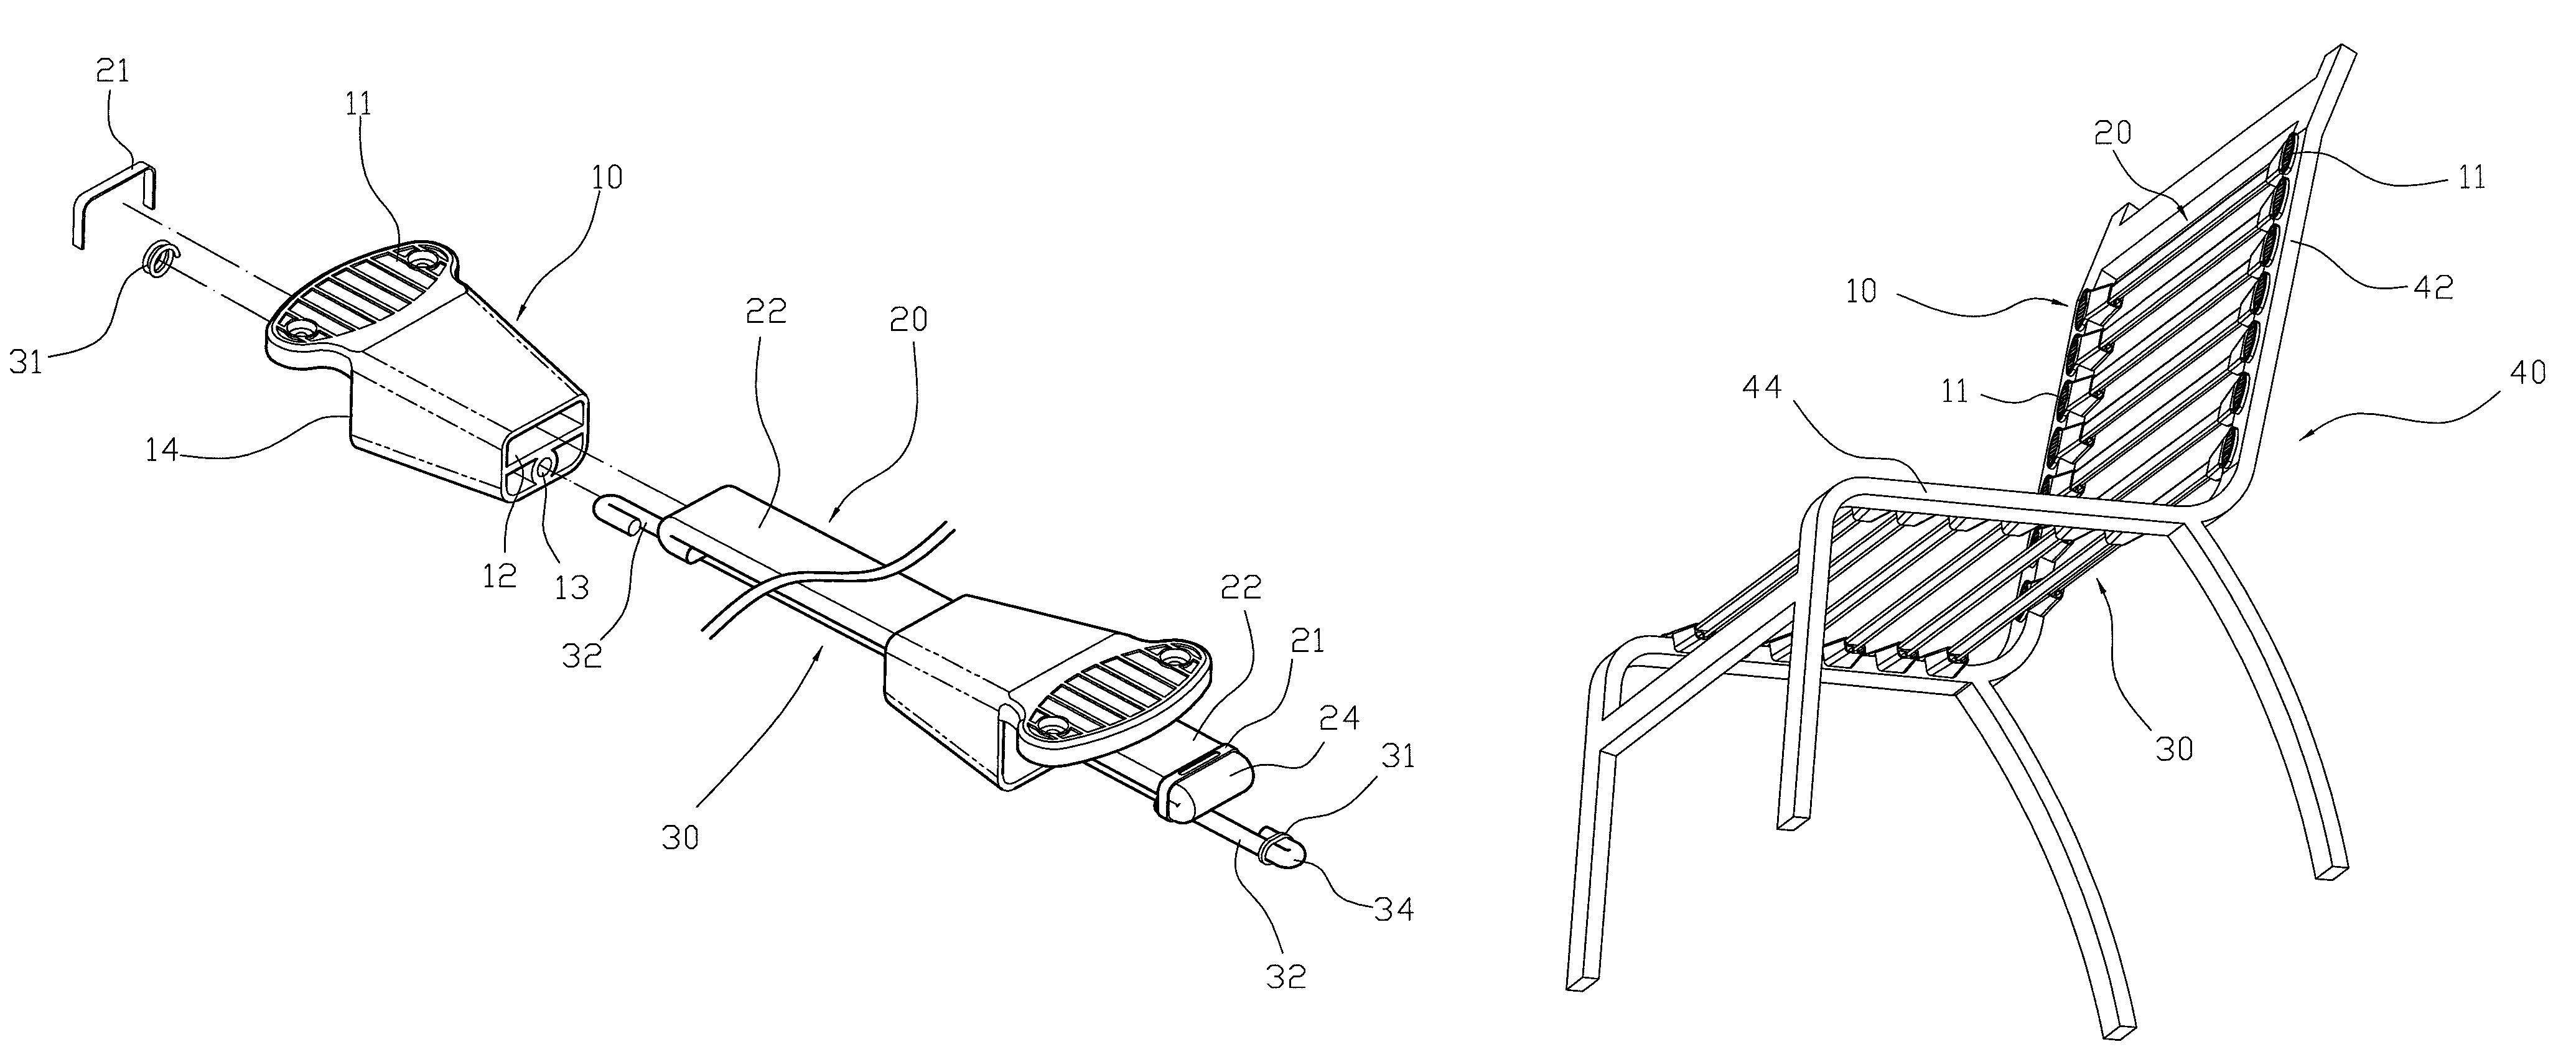 Elastic support assembly for chair